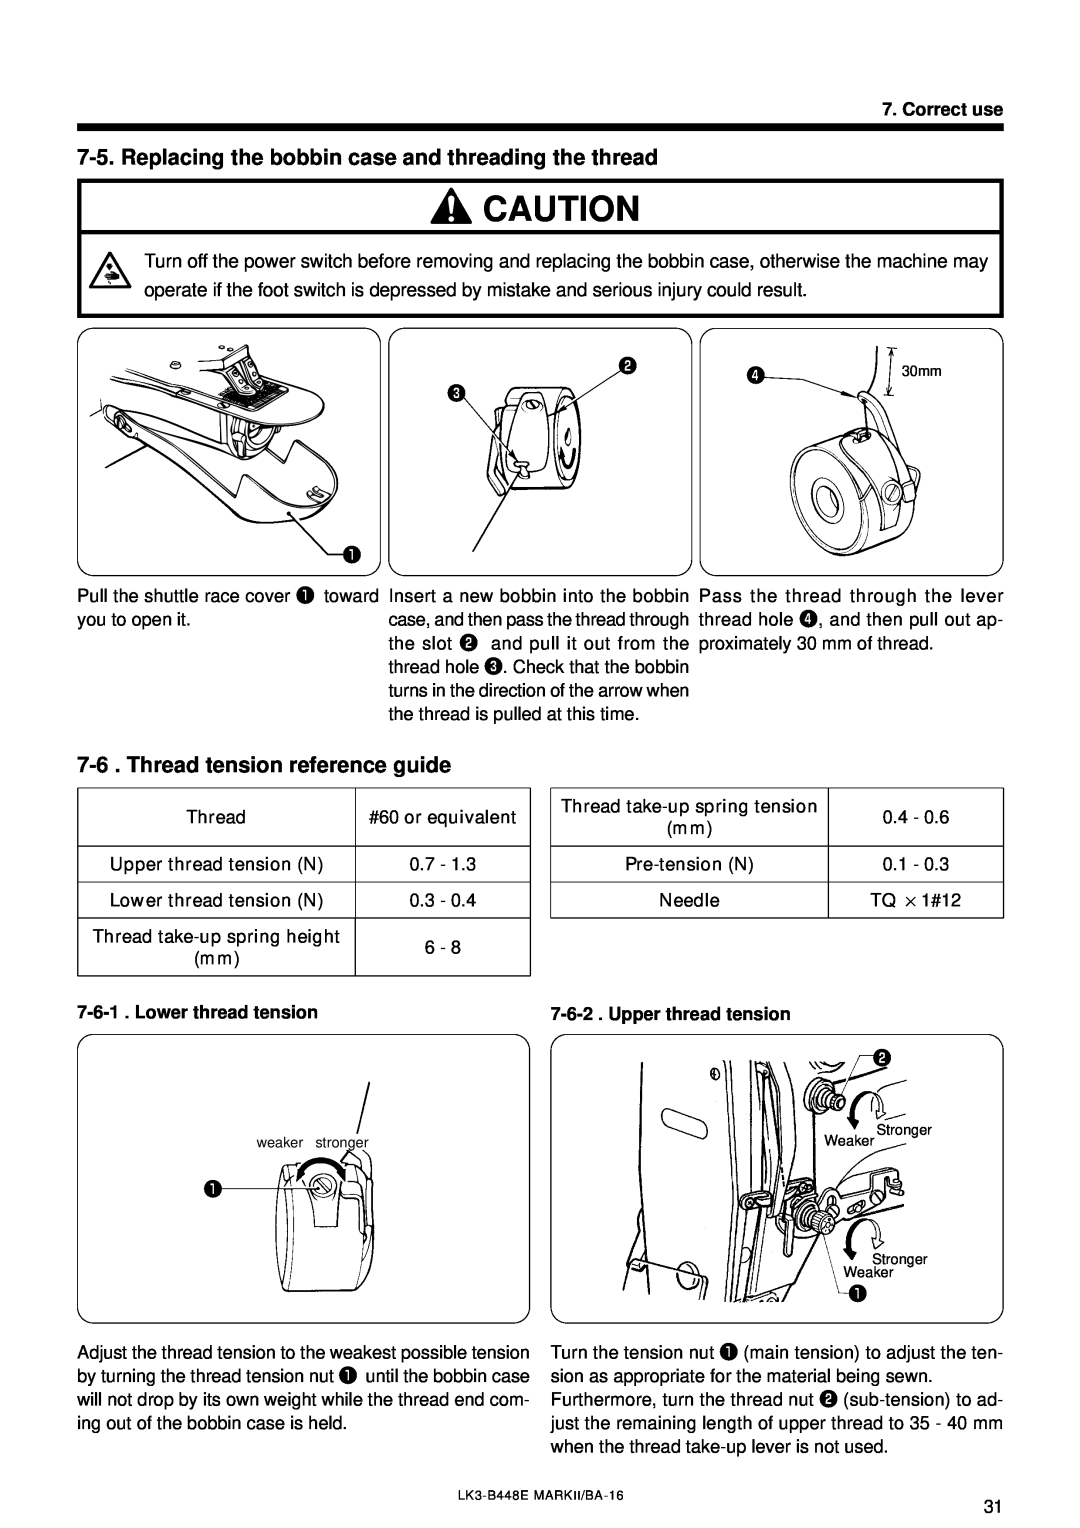 Brother LK3-B448E Replacing the bobbin case and threading the thread, Thread tension reference guide, Lower thread tension 